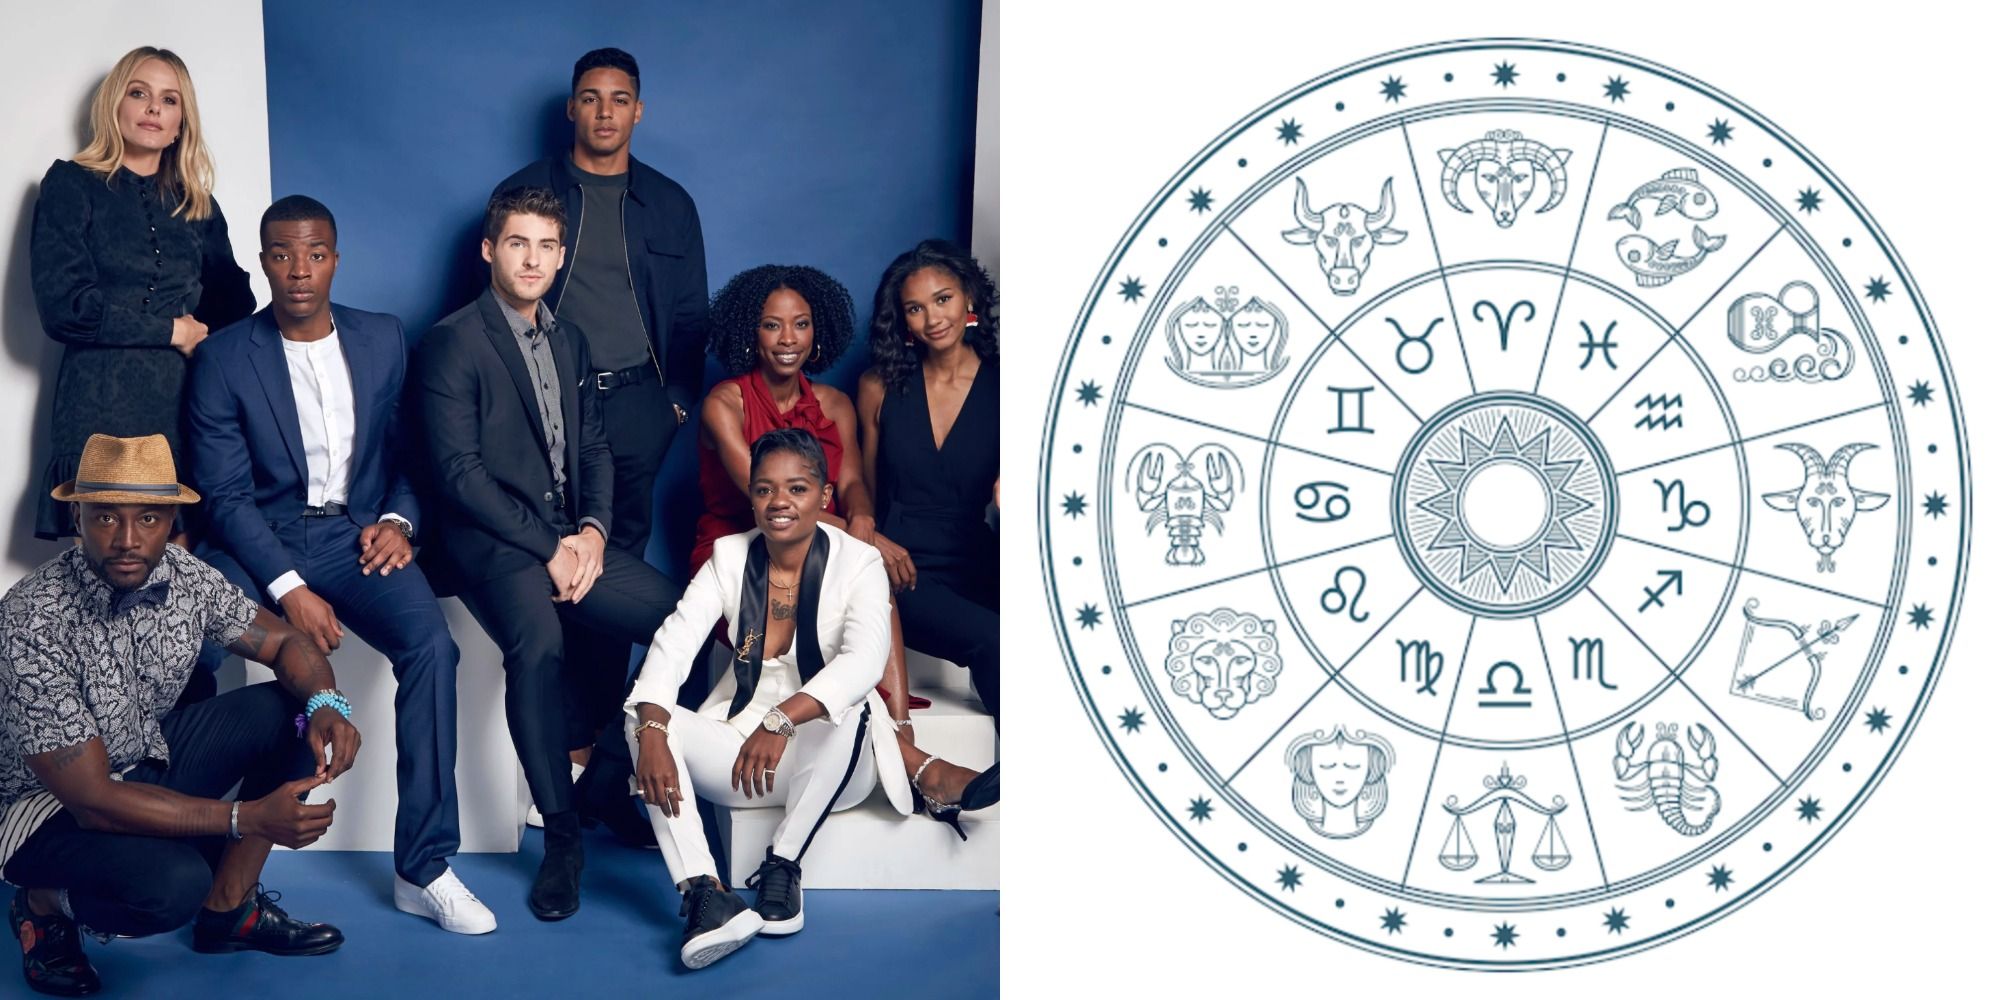 Cast of The American and a Zodiac Sign wheel.